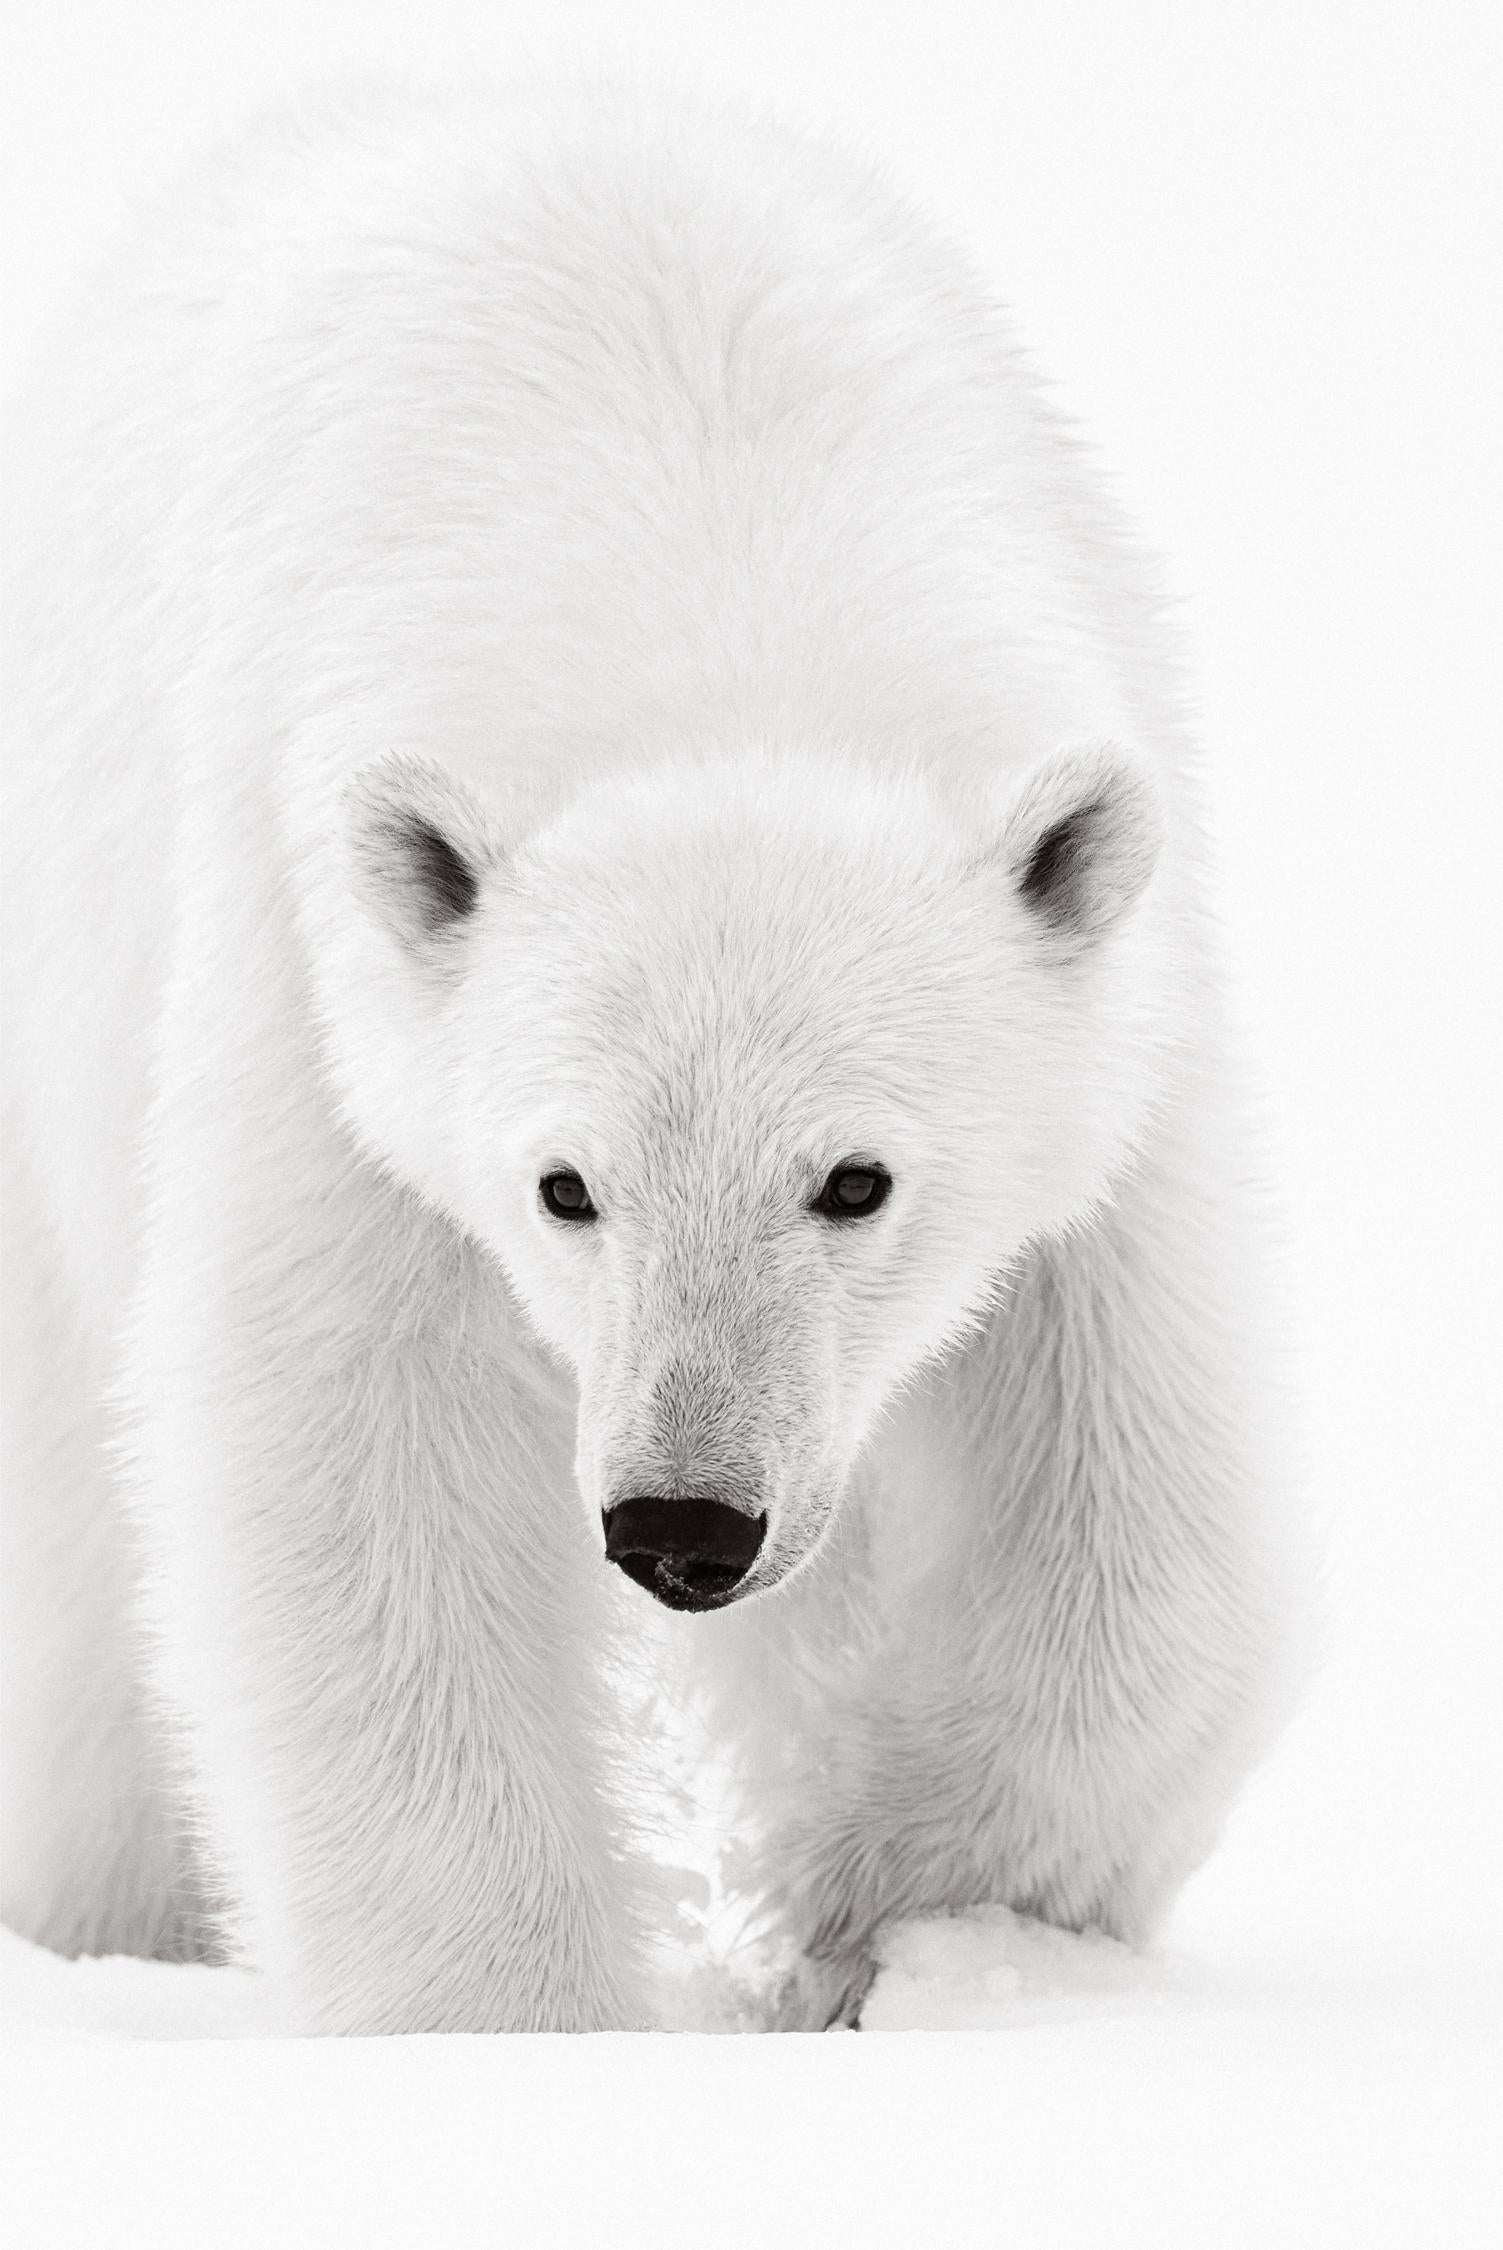 Drew Doggett Black and White Photograph - Intimate Portrait of a Polar Bear, Black & White Photography